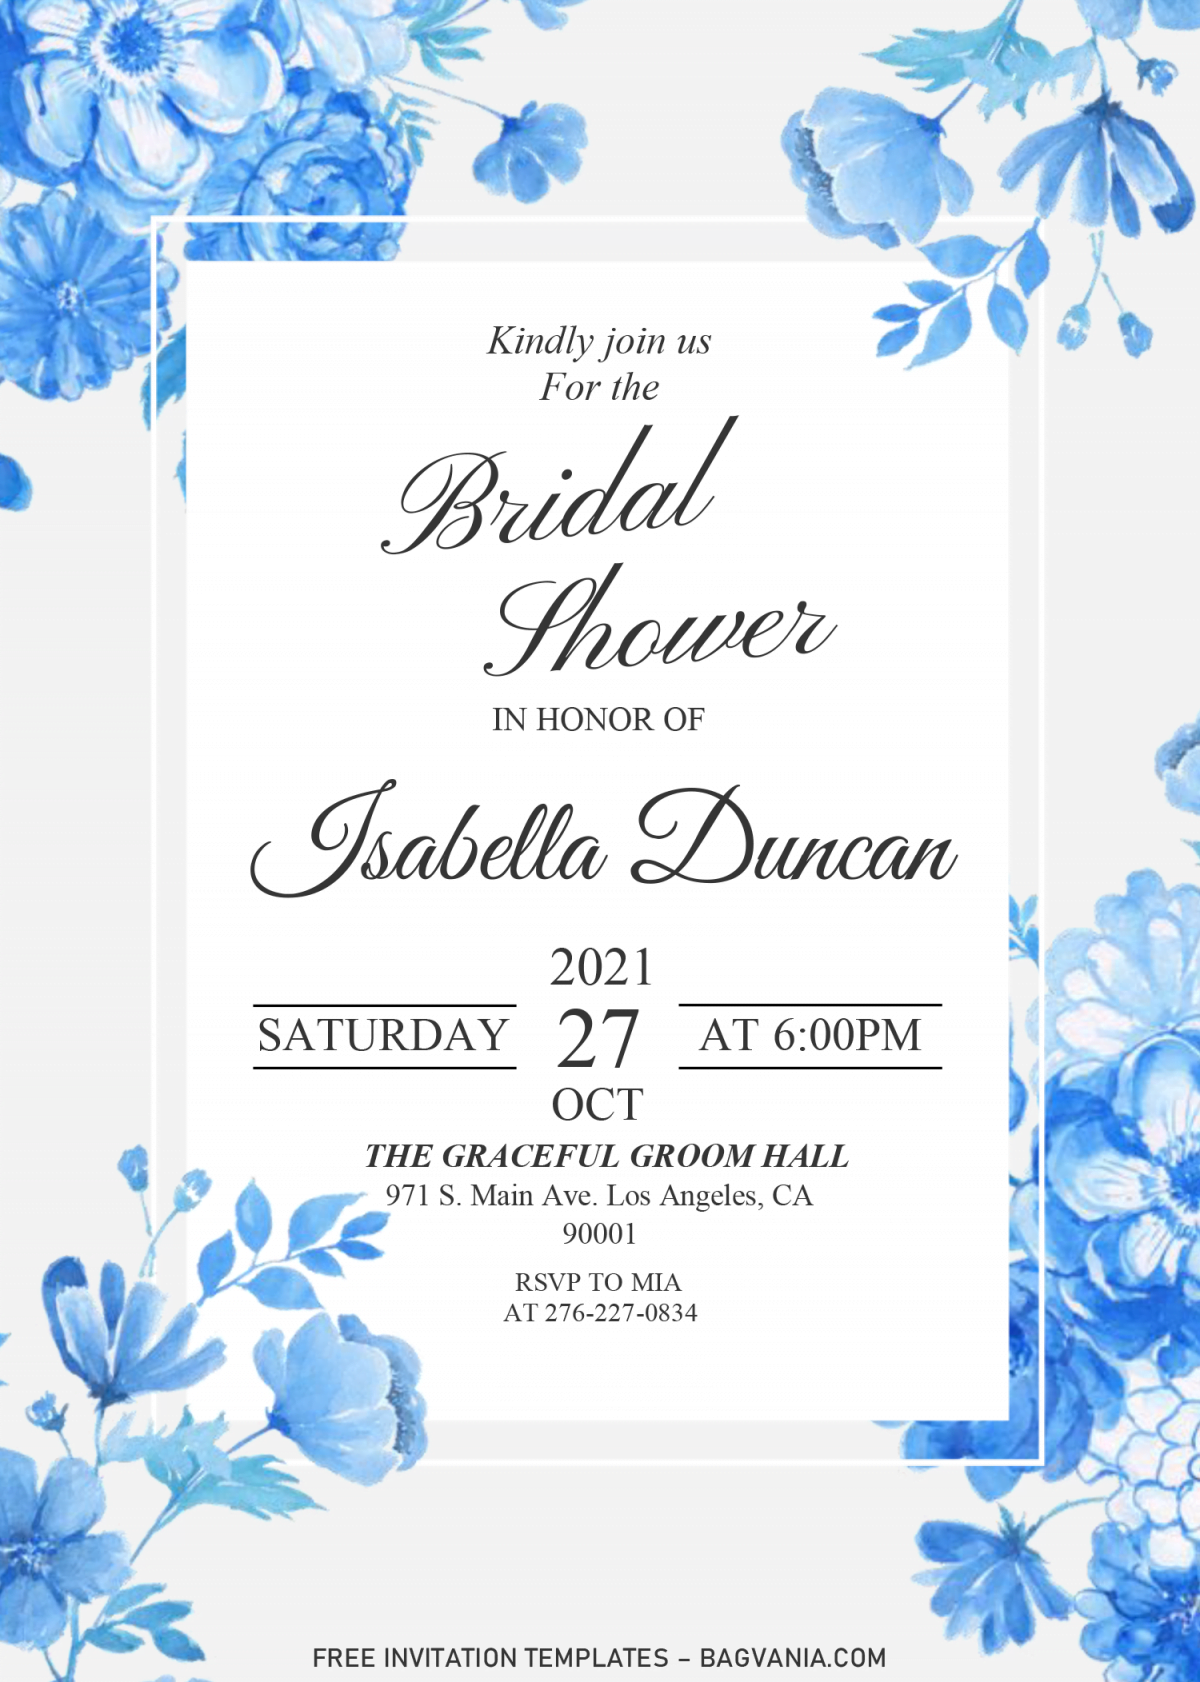 Modern Floral Invitation Templates - Editable .DOCX and has rectangle frame